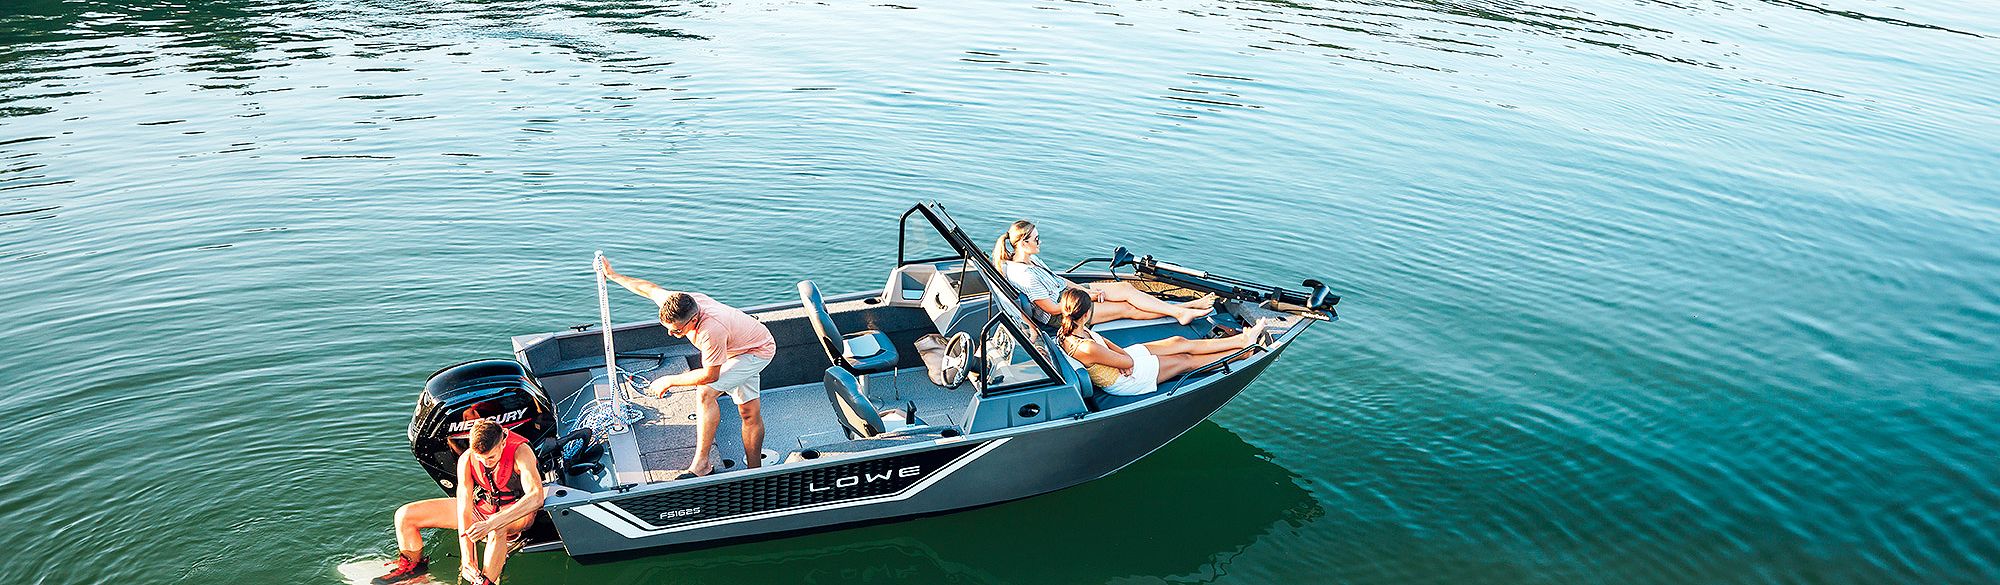 Lowe Fish and Ski Boat, Starboard View, Two Women Sitting in Bow, Man Standing and Wakeboarder Preparing to Ride